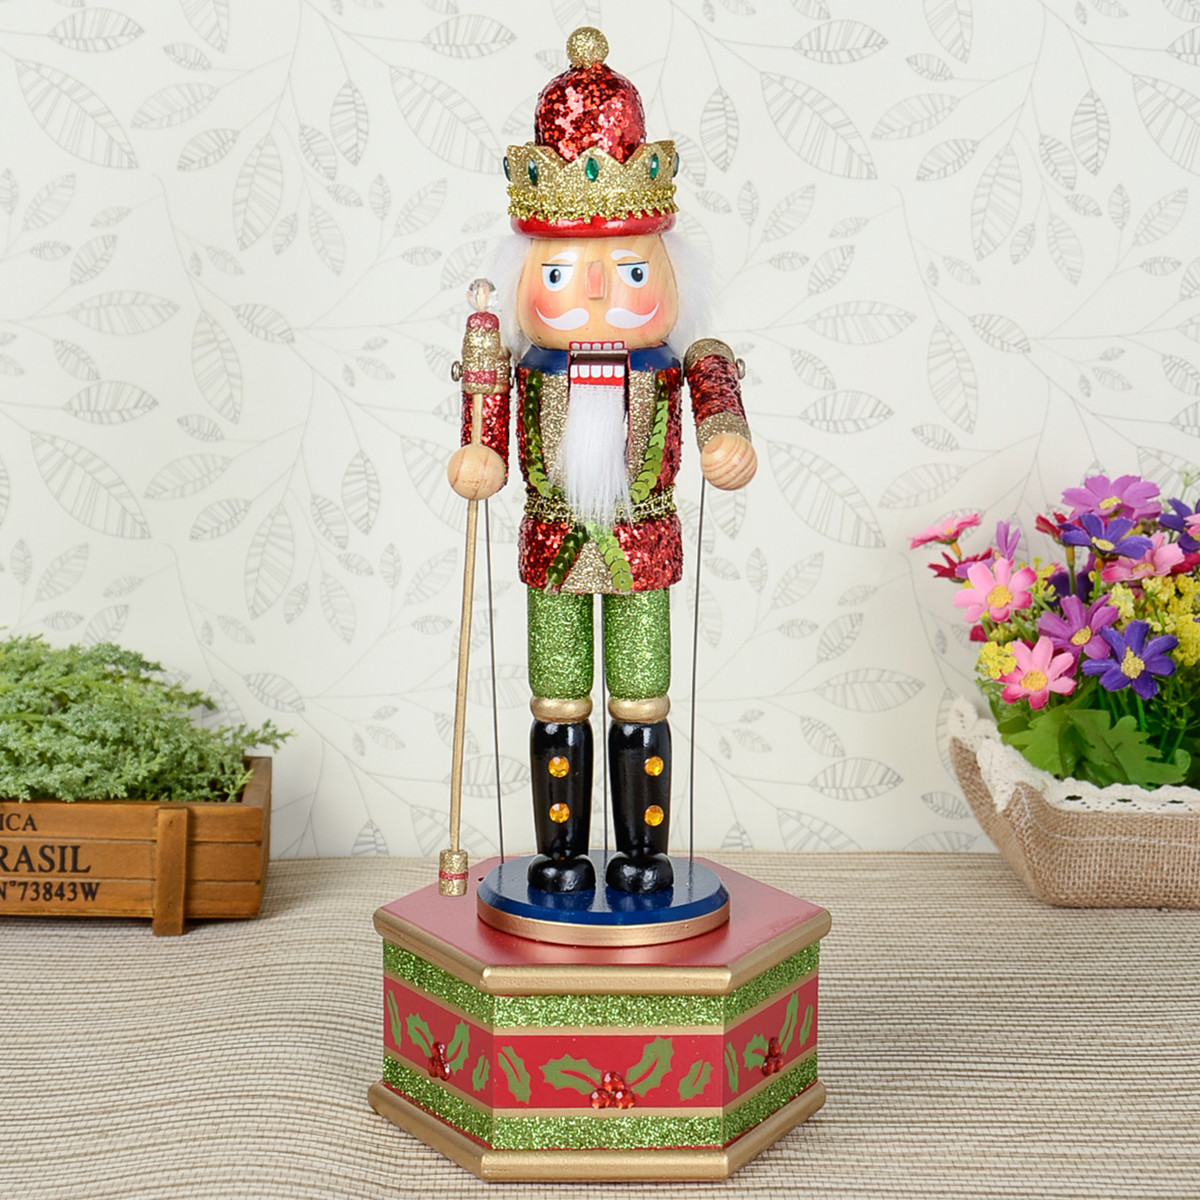 32cm-Wooden-Music-Box-Nutcracker-Doll-Soldier-Vintage-Handcraft-Decoration-Christmas-Gifts-1398446-3